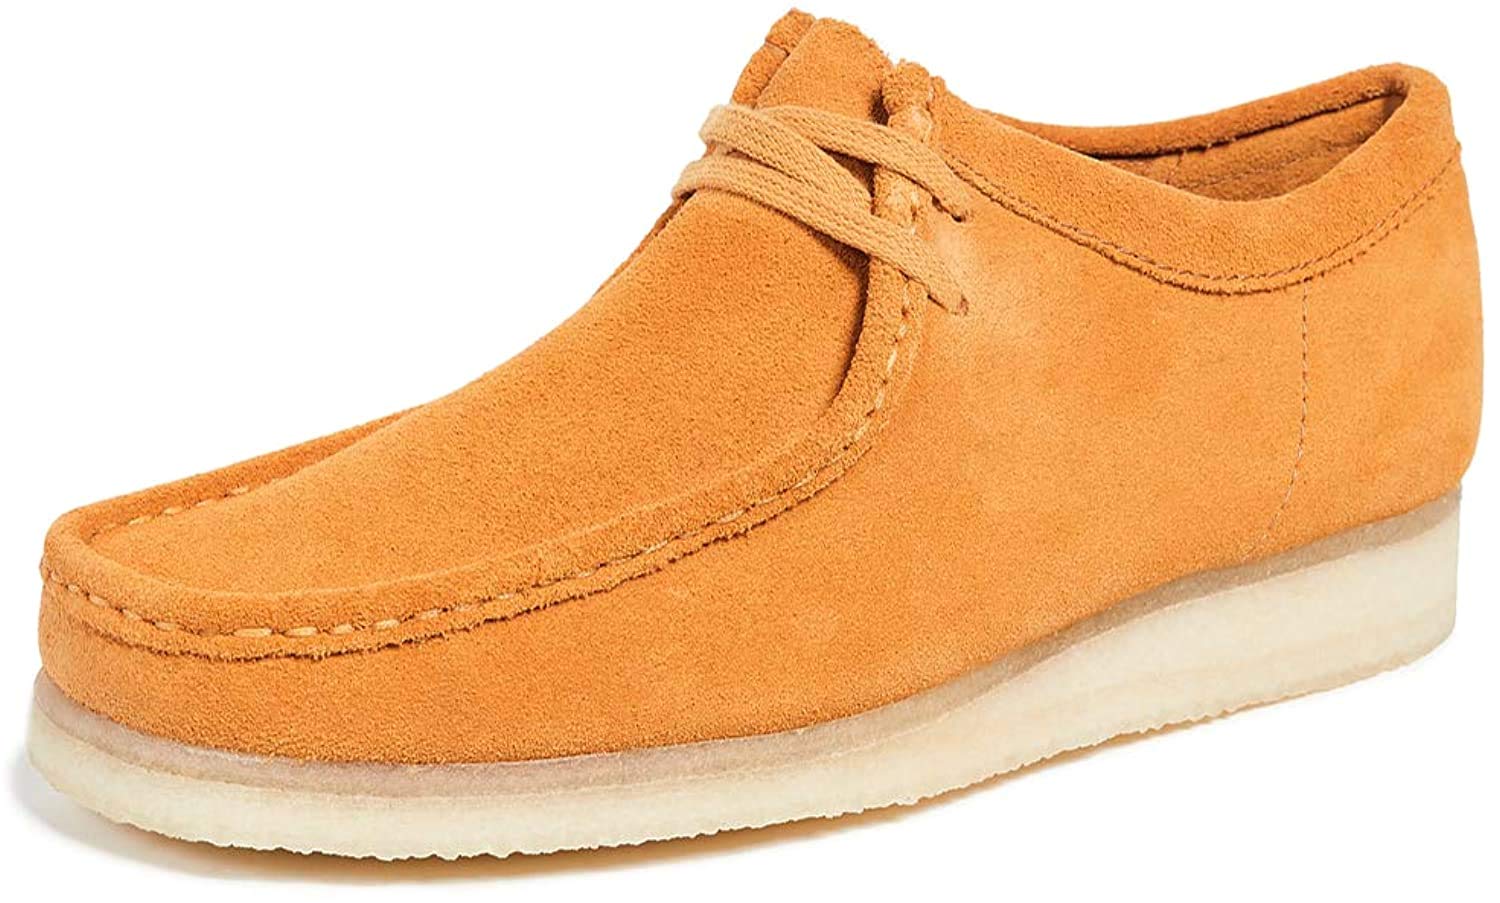 Clarks Wallabee Mens Shoes Turmeric Suede 26139179